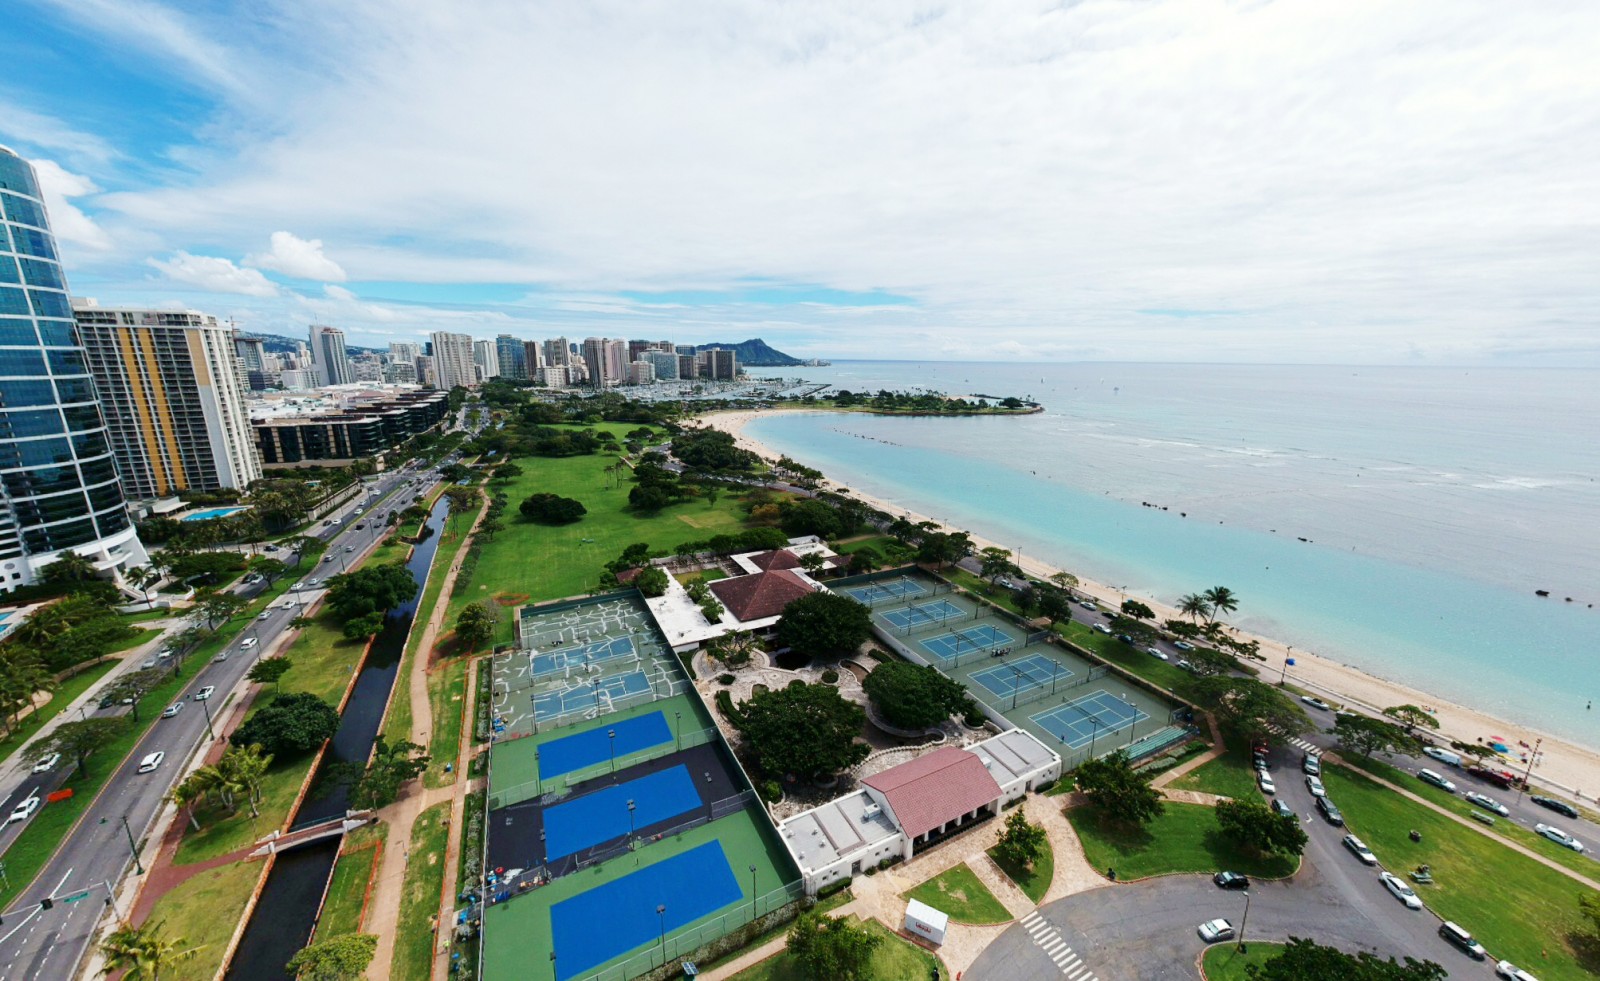 The Future of Honolulu Depends on Its Parks